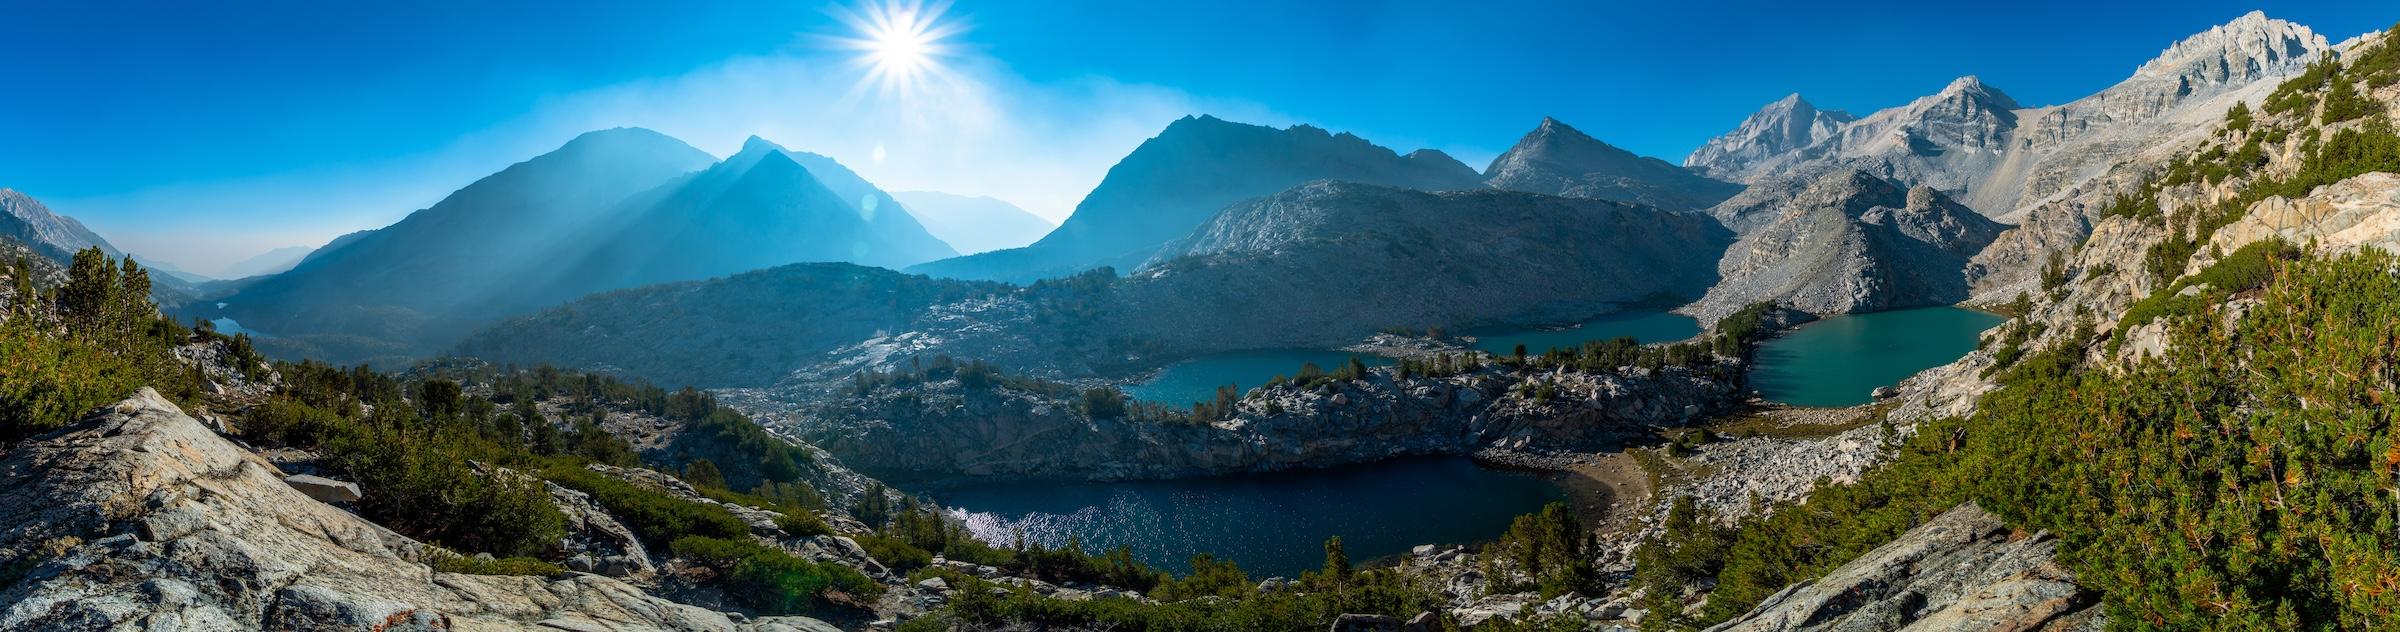 Panorama of Treasure Lakes in The Little Lakes Valley of the Sierras. Photo by Brock Dallman